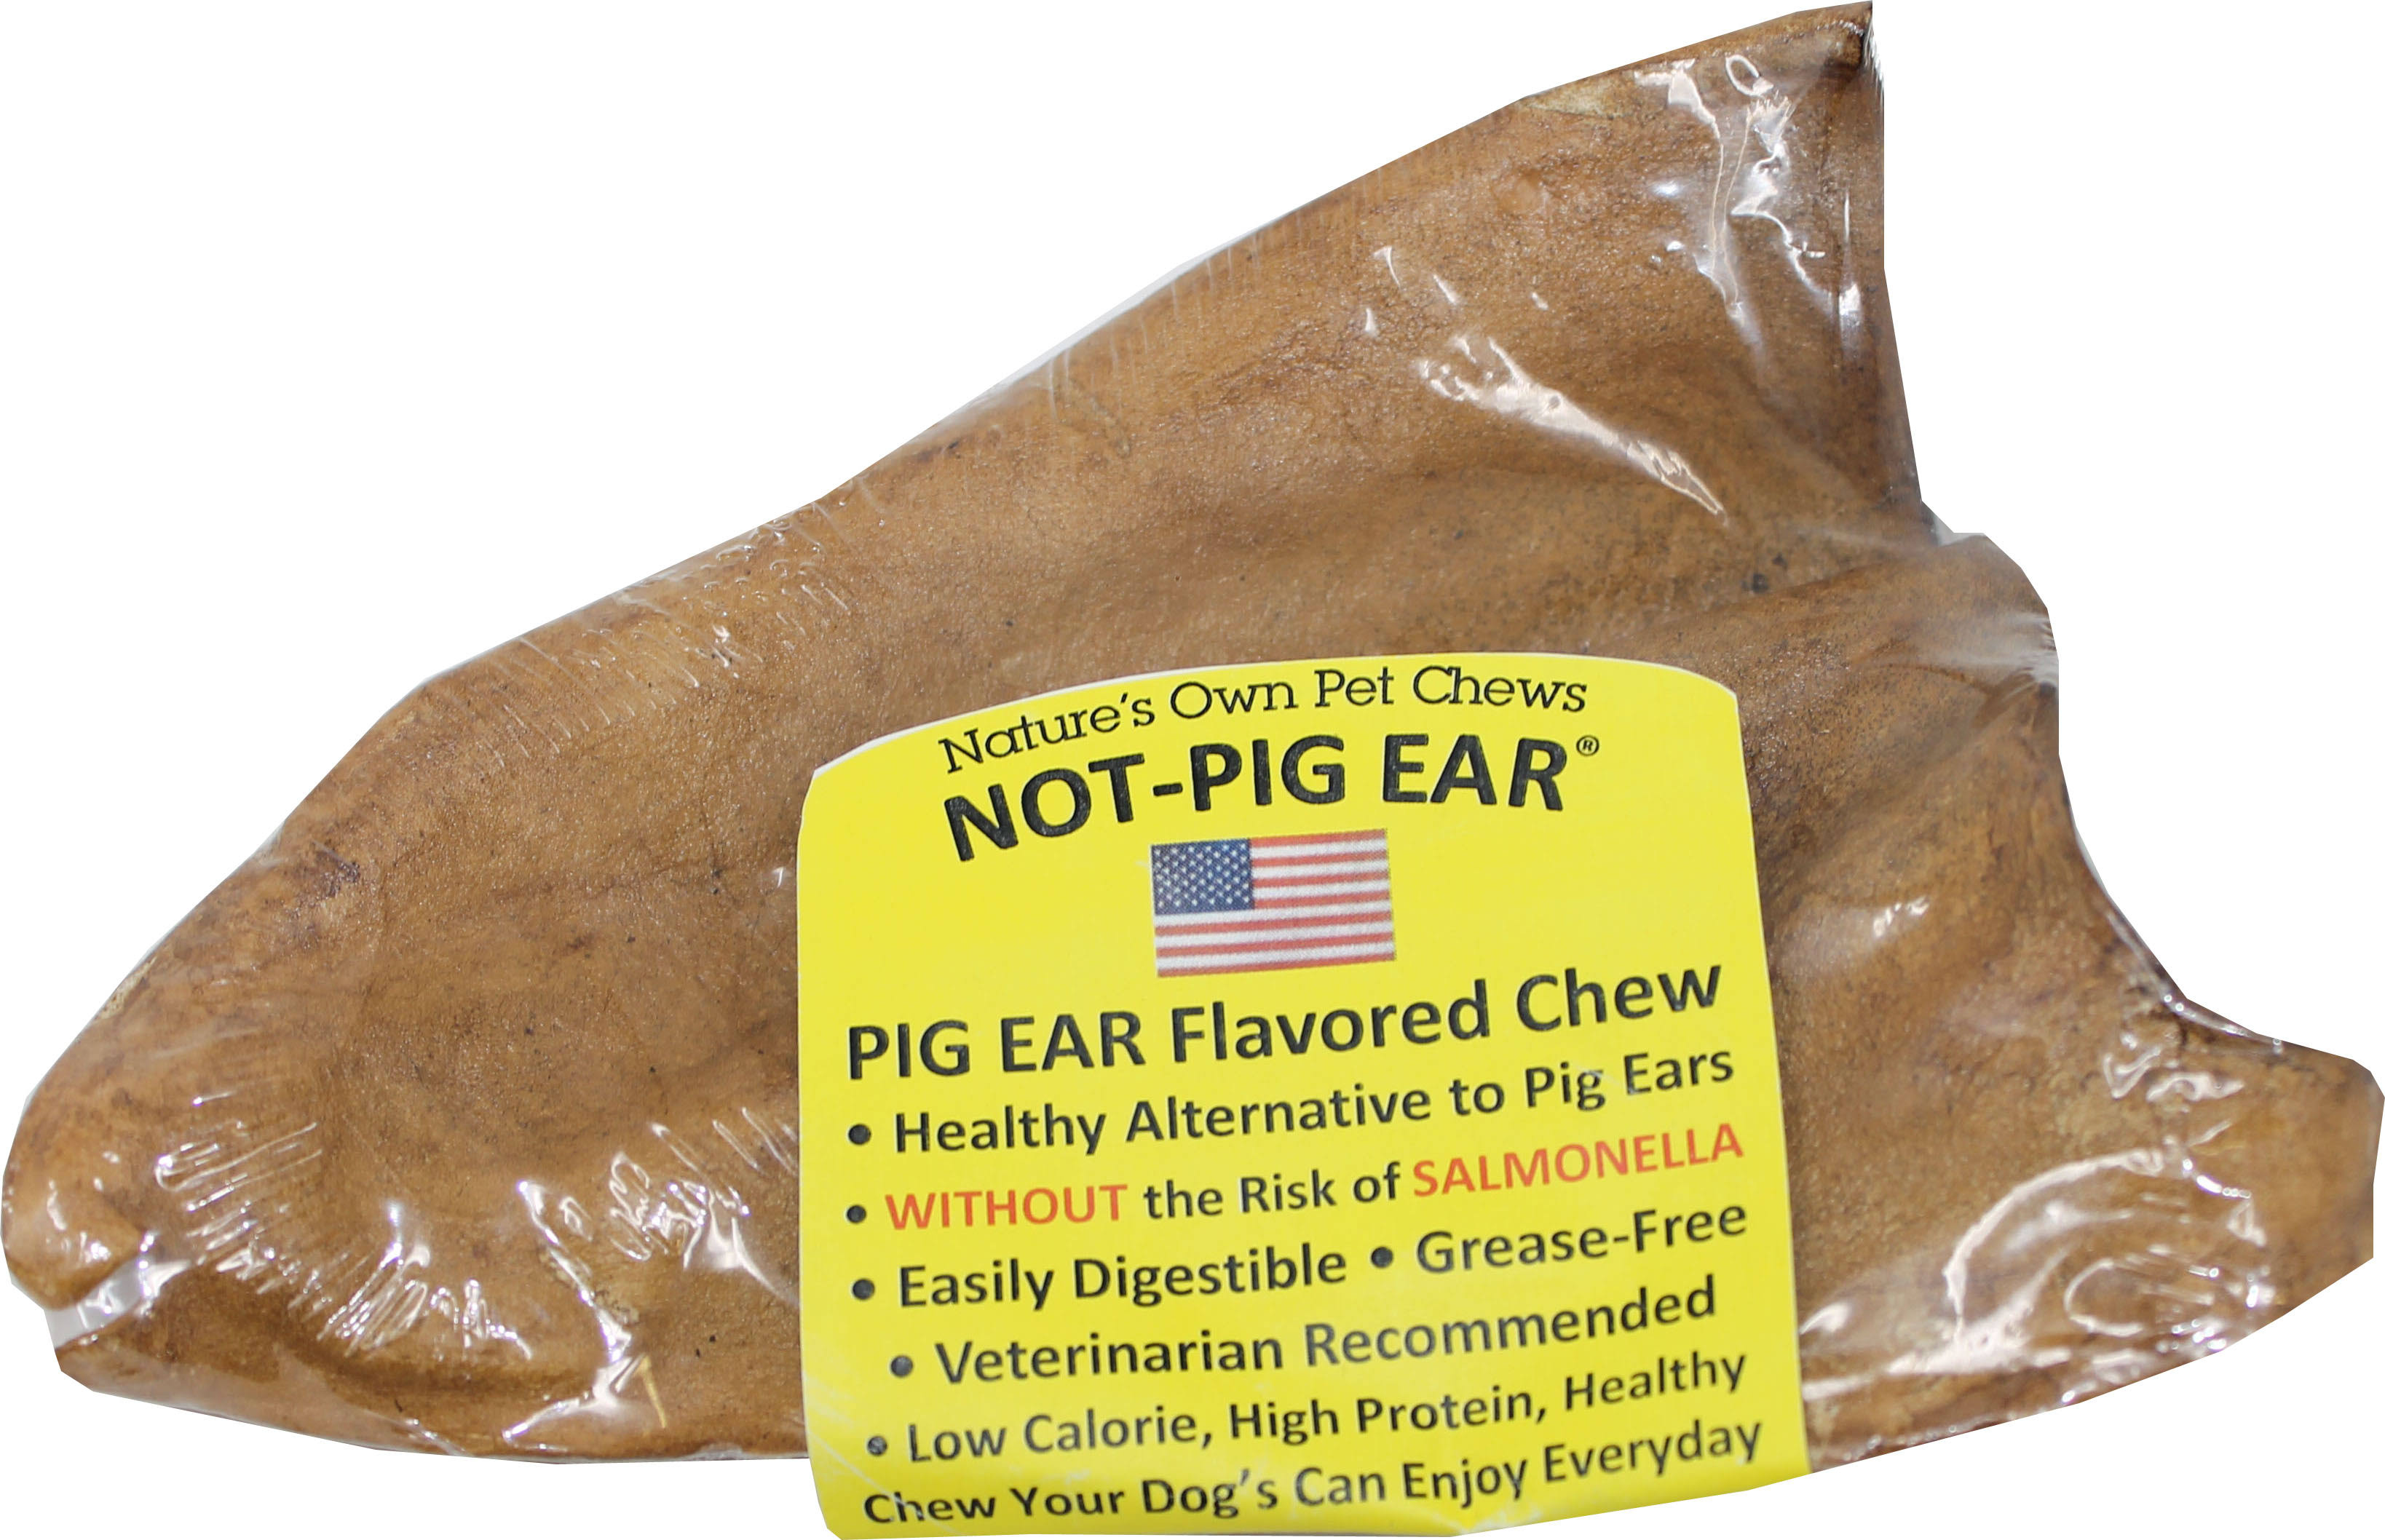 50 Best Buy Bones 00123 USA not-pig Ear All Natural Non-greasy Chew Treat, Pork, Large ($1.94 @ 50 min)